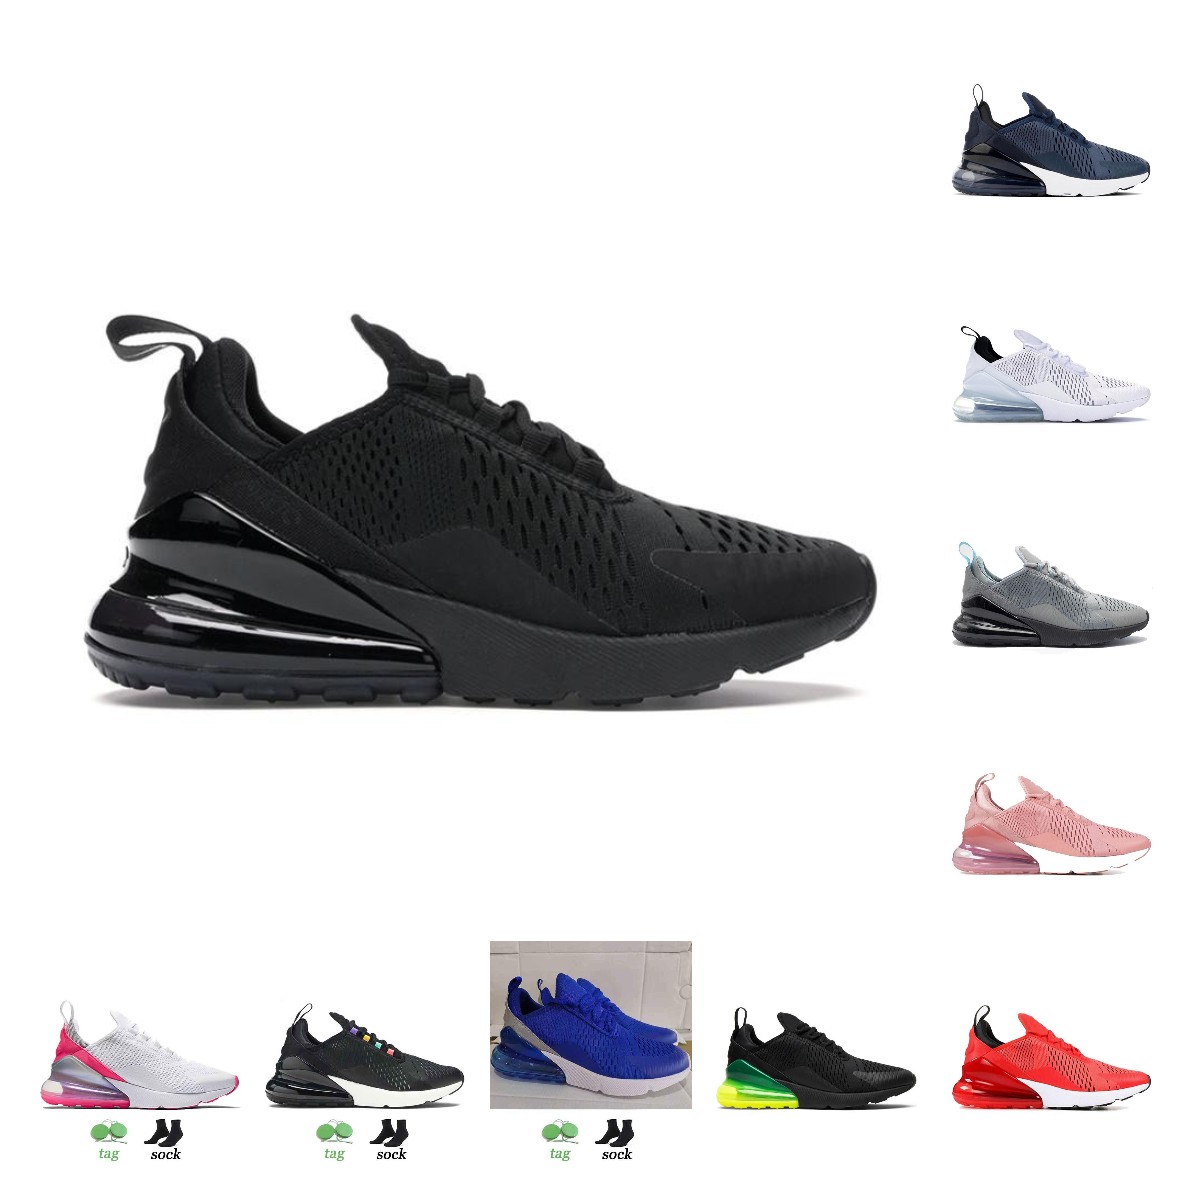 

270 Mens Womens Tennis Running Shoes 270s Navy Blue Triple Black White Barely Rose Pink Red Dusty Cactus Dark Stucco Run Sports Sneakers Trainers, B49 white volt 36-45